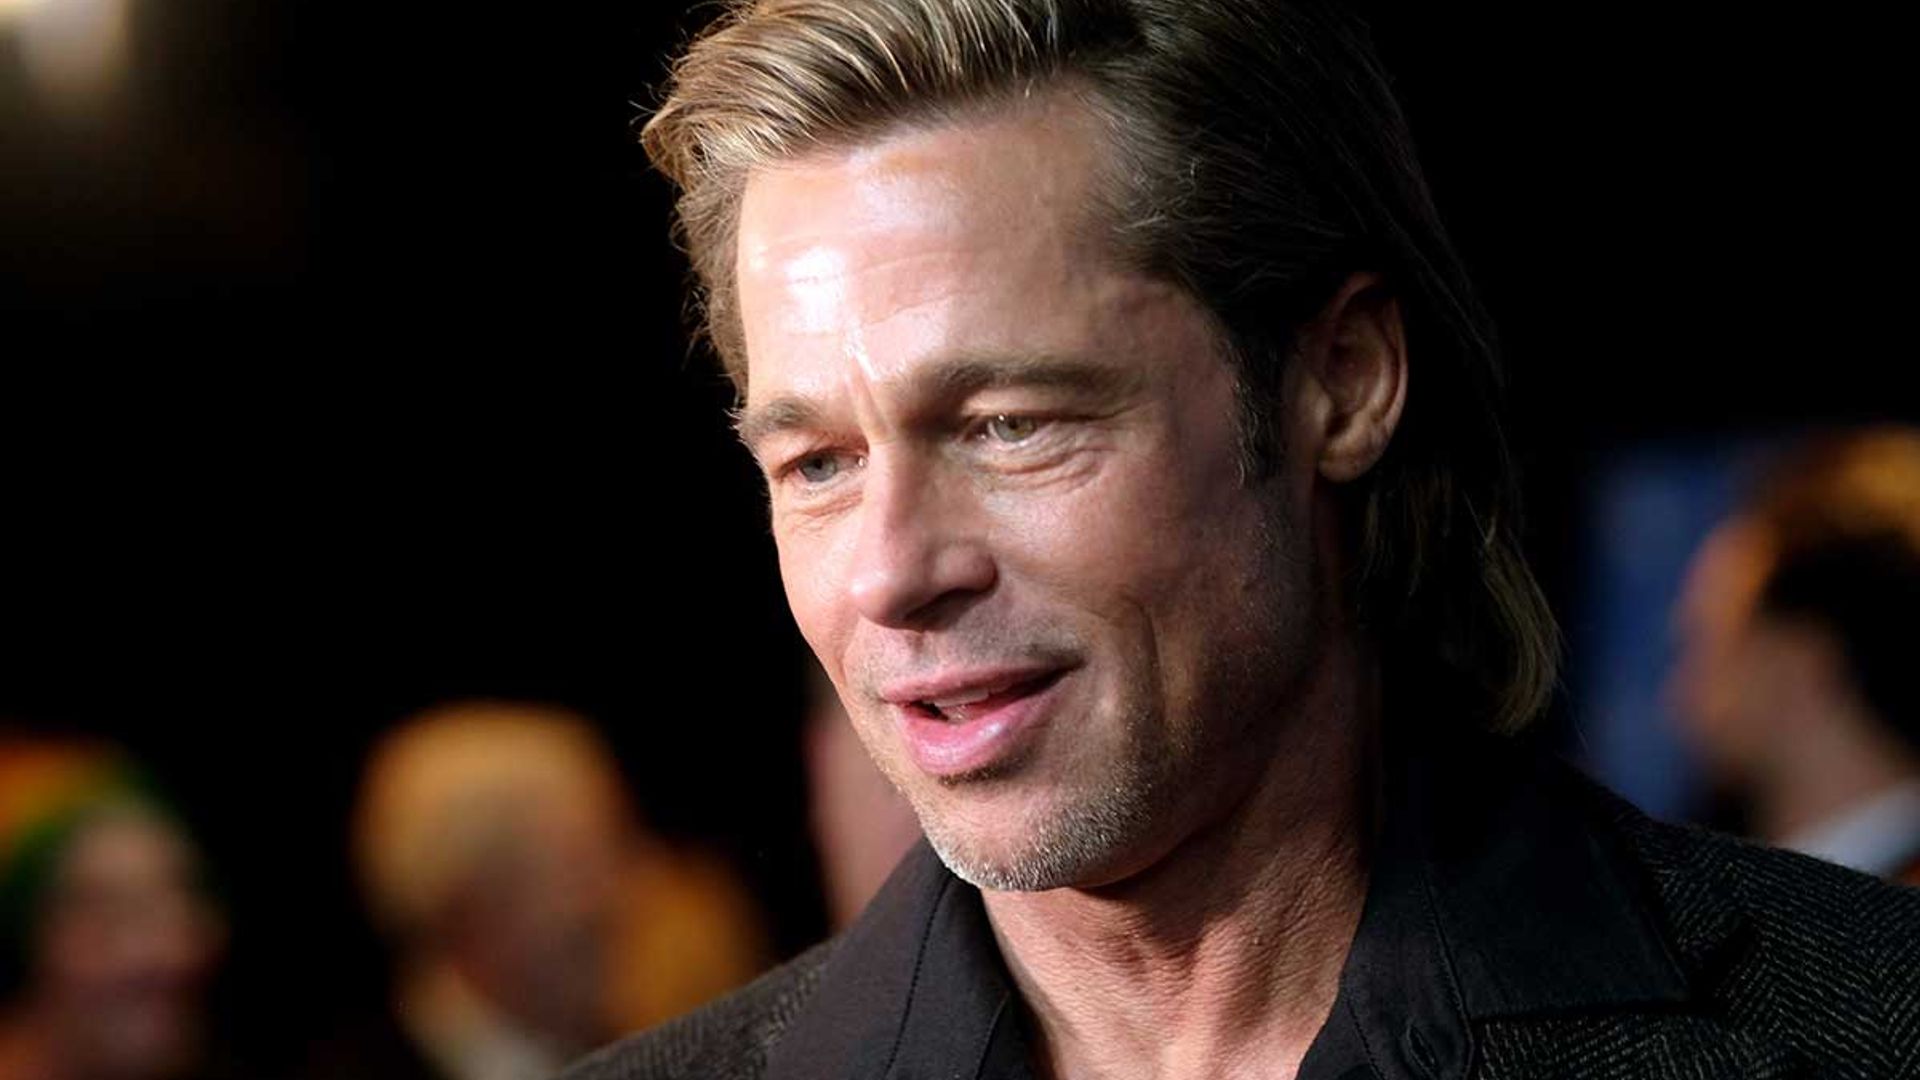 Brad Pitt paid a special tribute to Prince Harry as he won a BAFTA for his role in Once Upon a Time in Hollywood